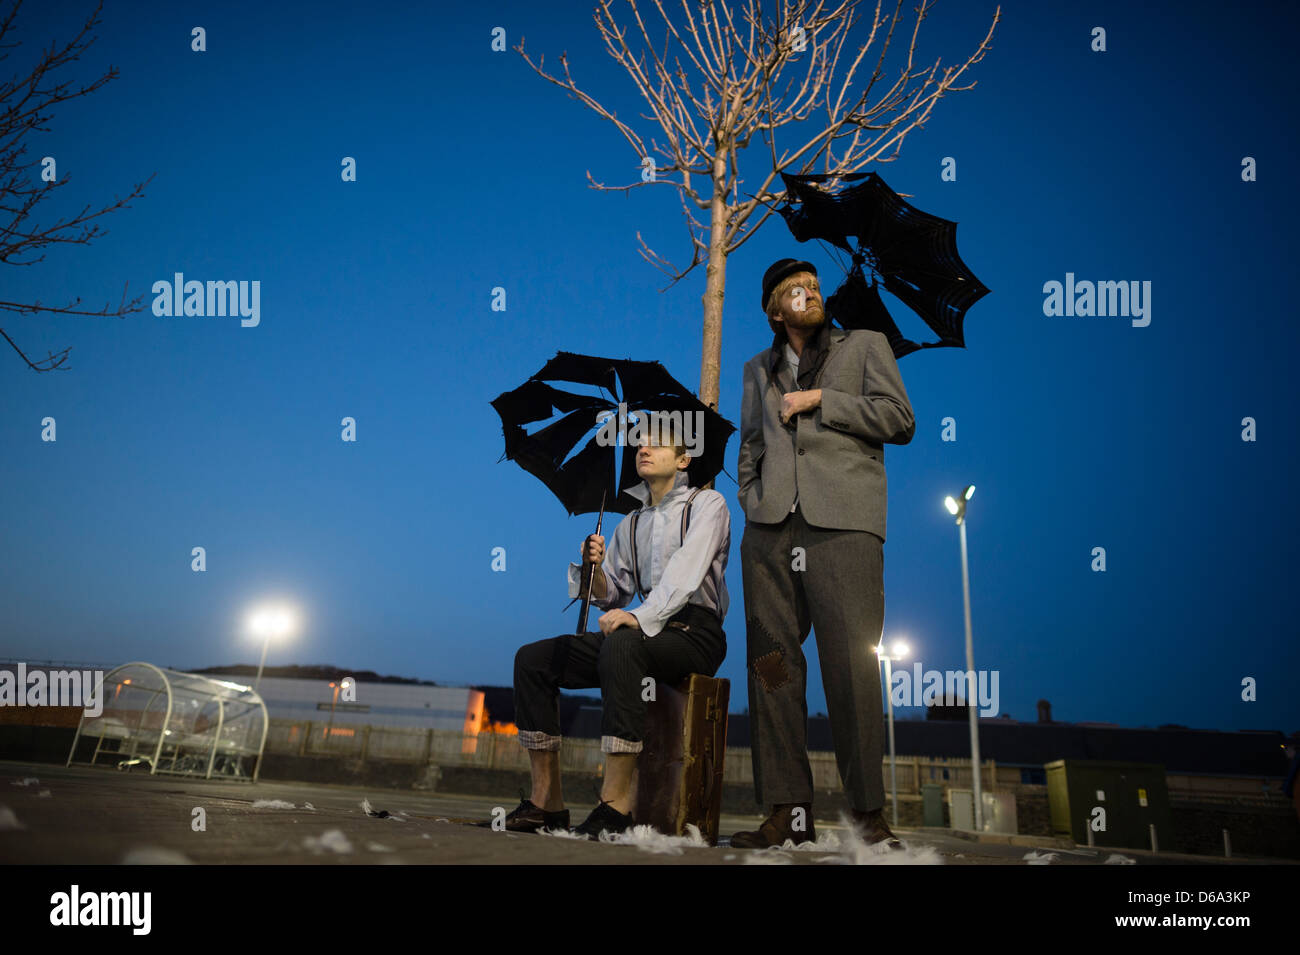 2 actors performing as Vladimir & Estragon in Samuel Beckett's classic play 'Waiting for Godot' in a deserted carpark at night Stock Photo